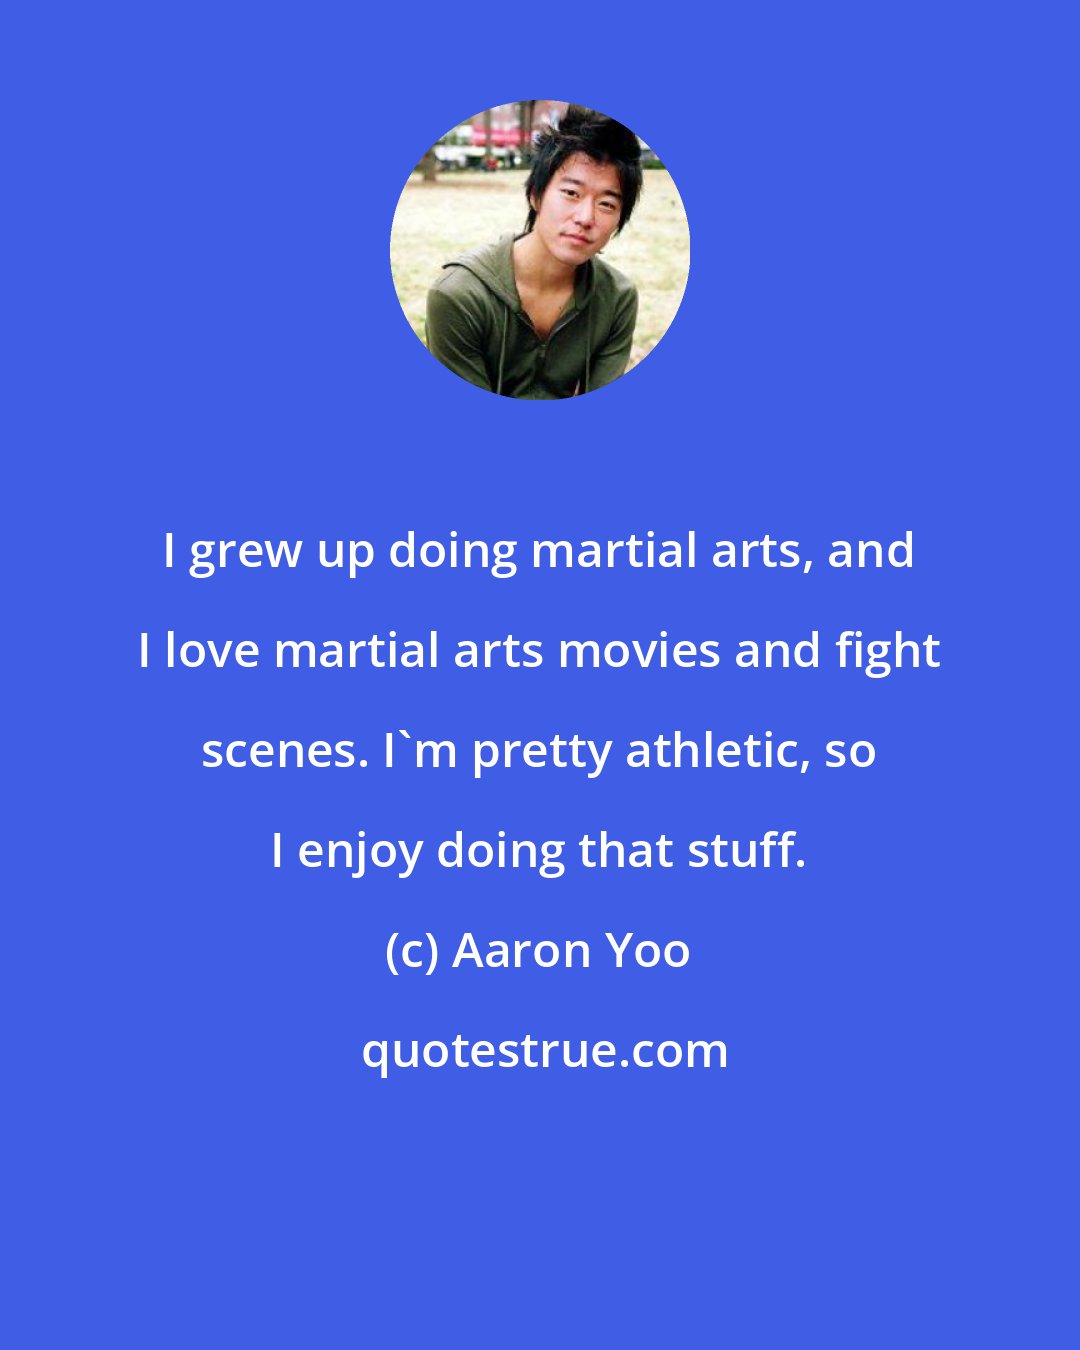 Aaron Yoo: I grew up doing martial arts, and I love martial arts movies and fight scenes. I'm pretty athletic, so I enjoy doing that stuff.